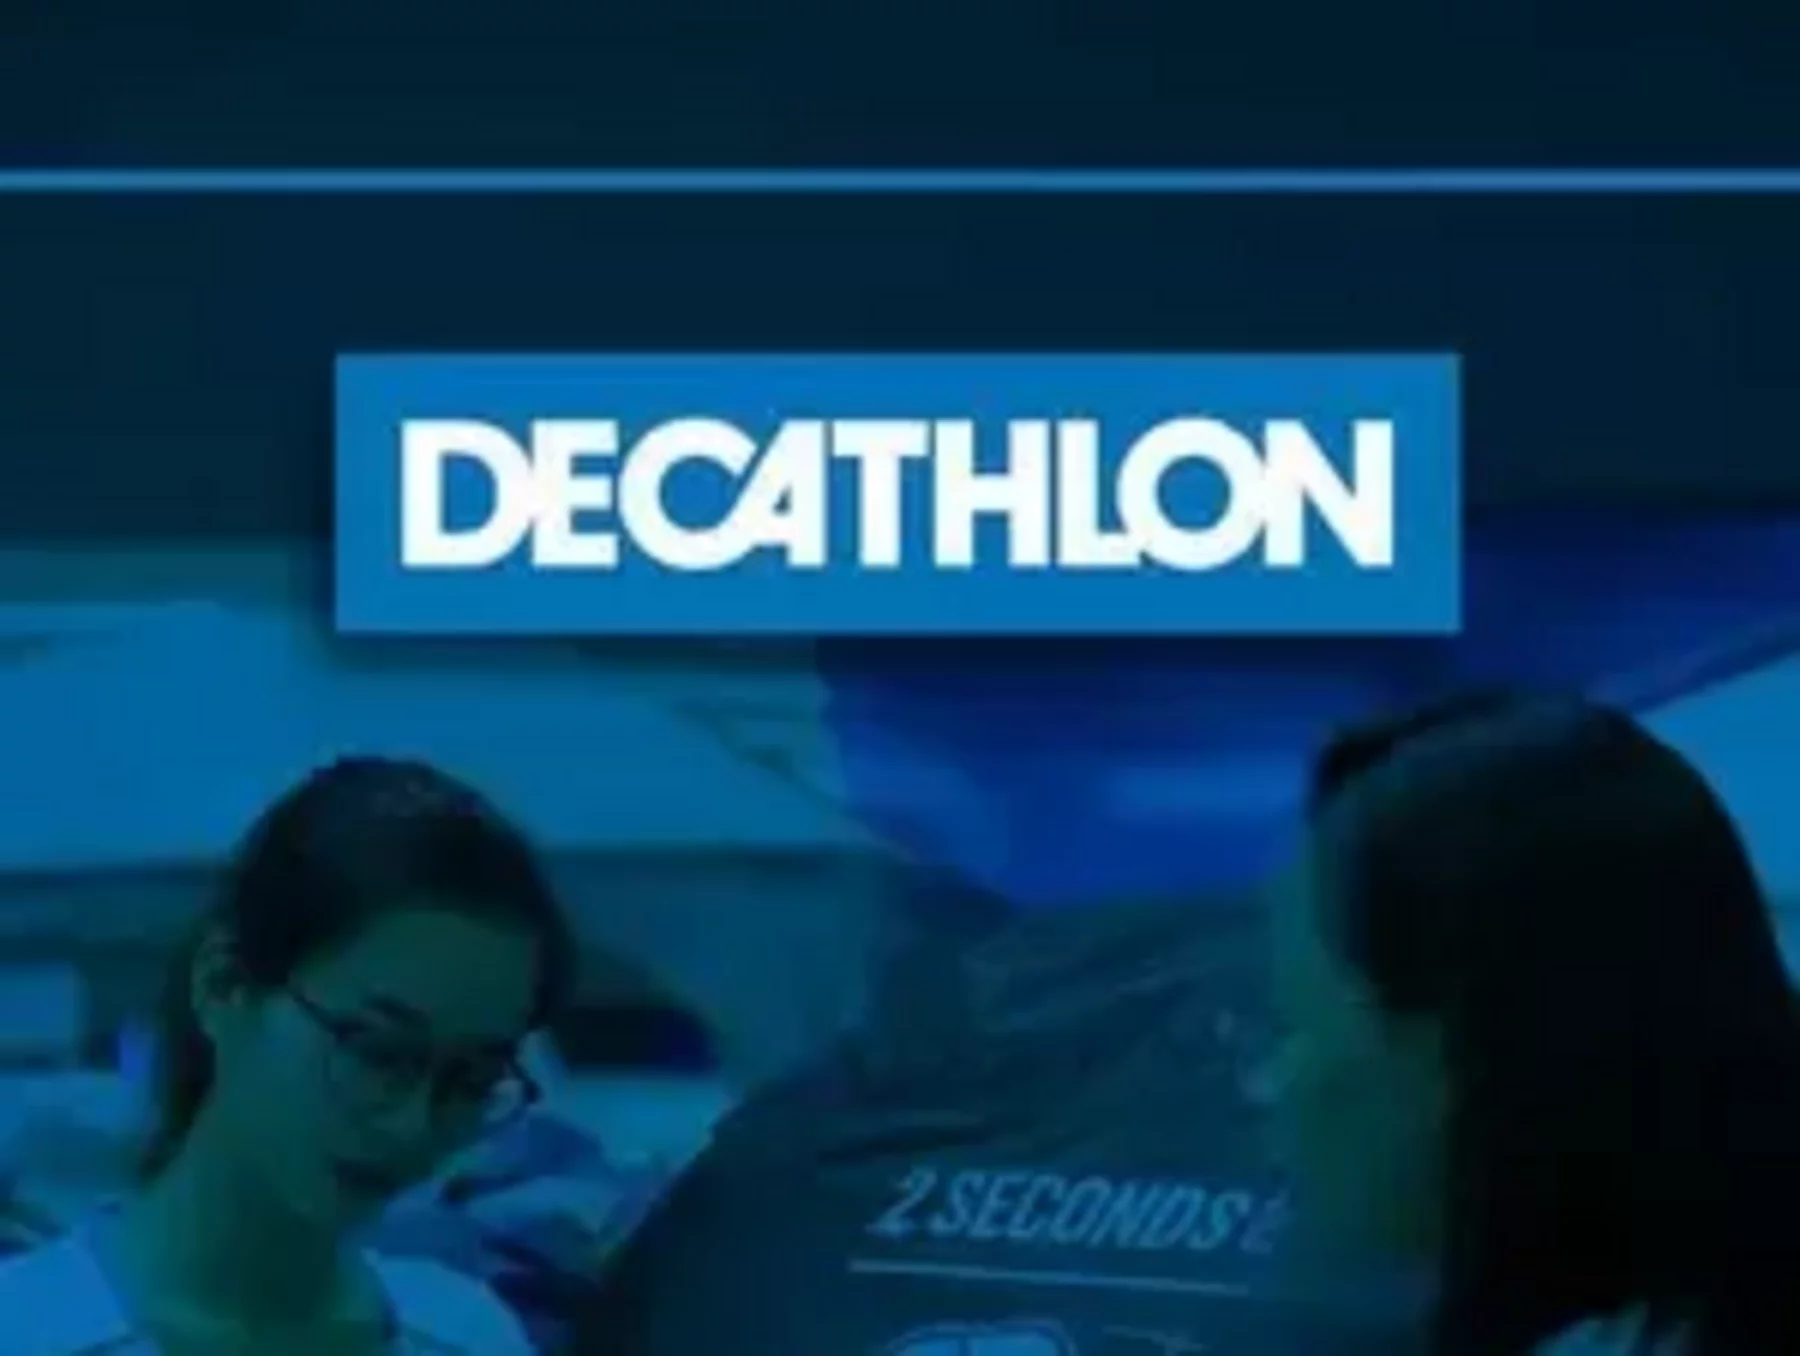 The production and manufacturing of Decathlon products